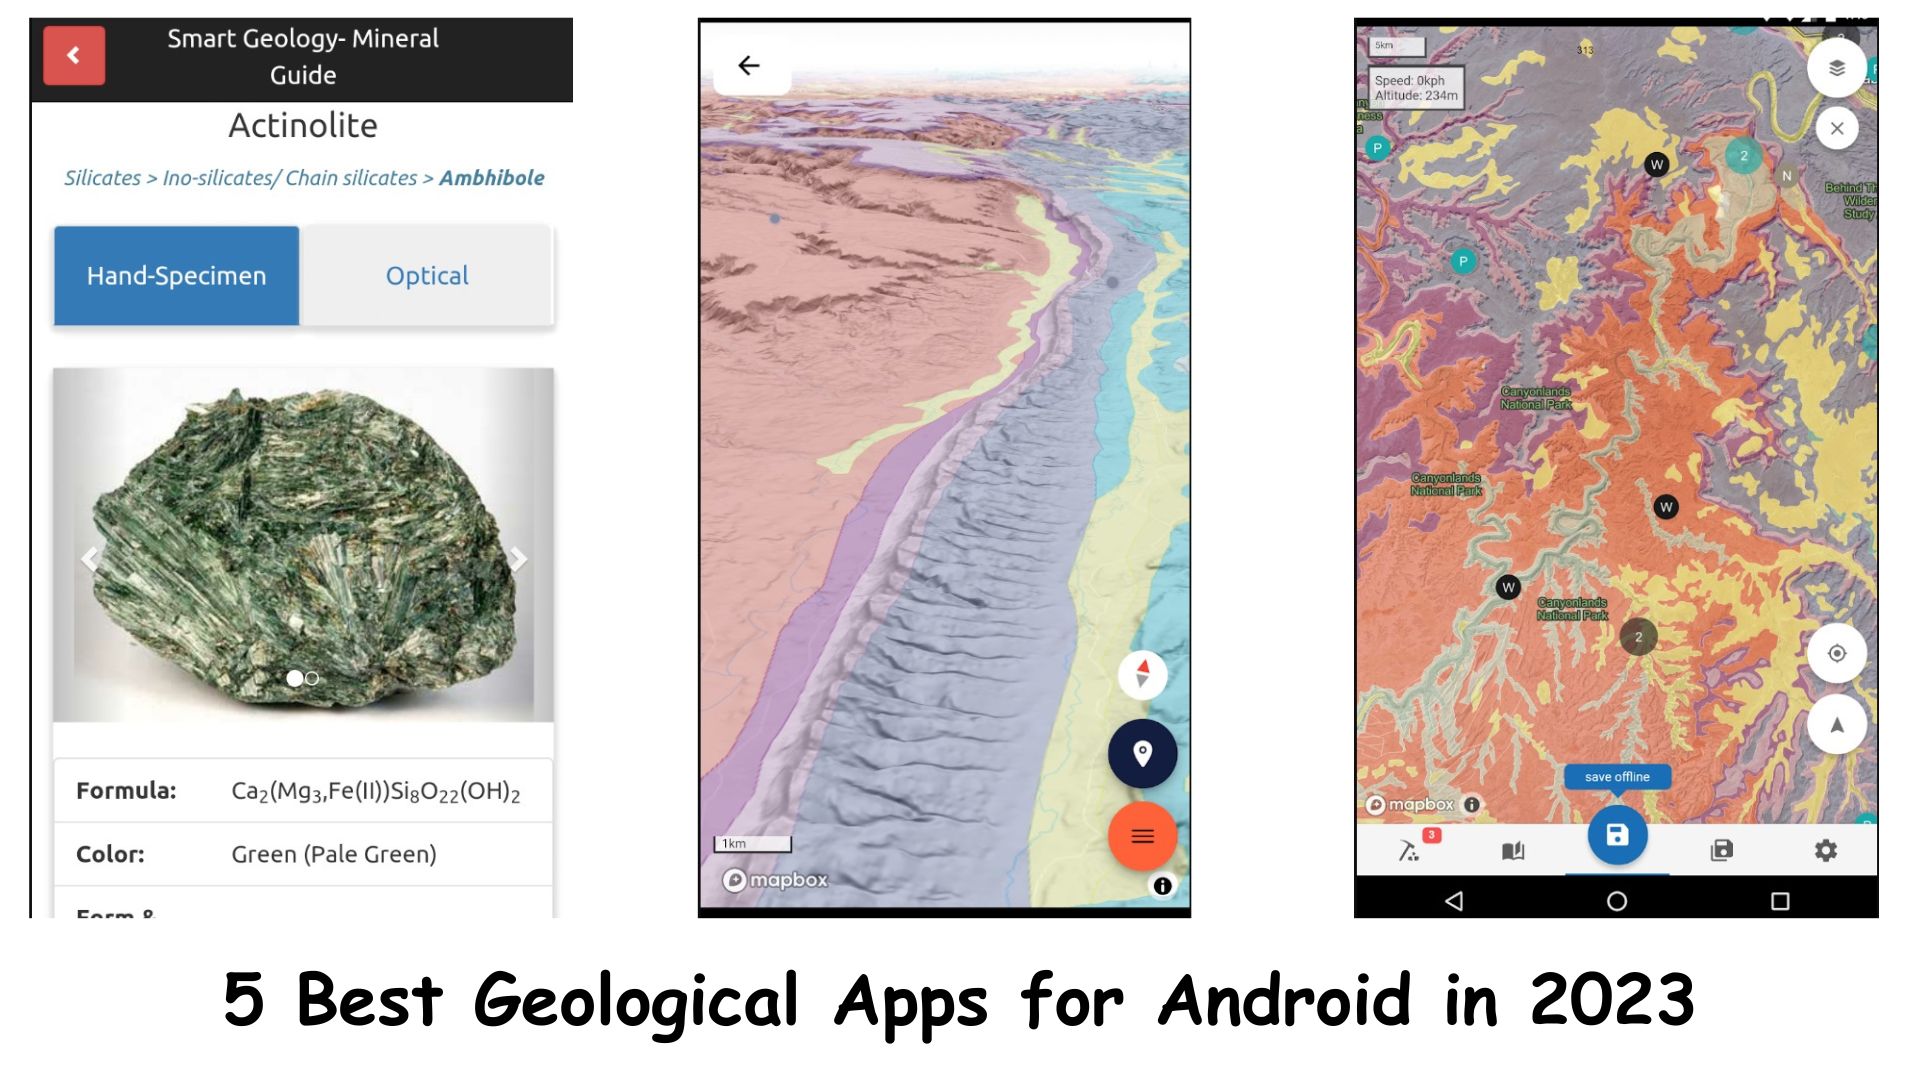 5 Best Geological Apps for Android in 2023